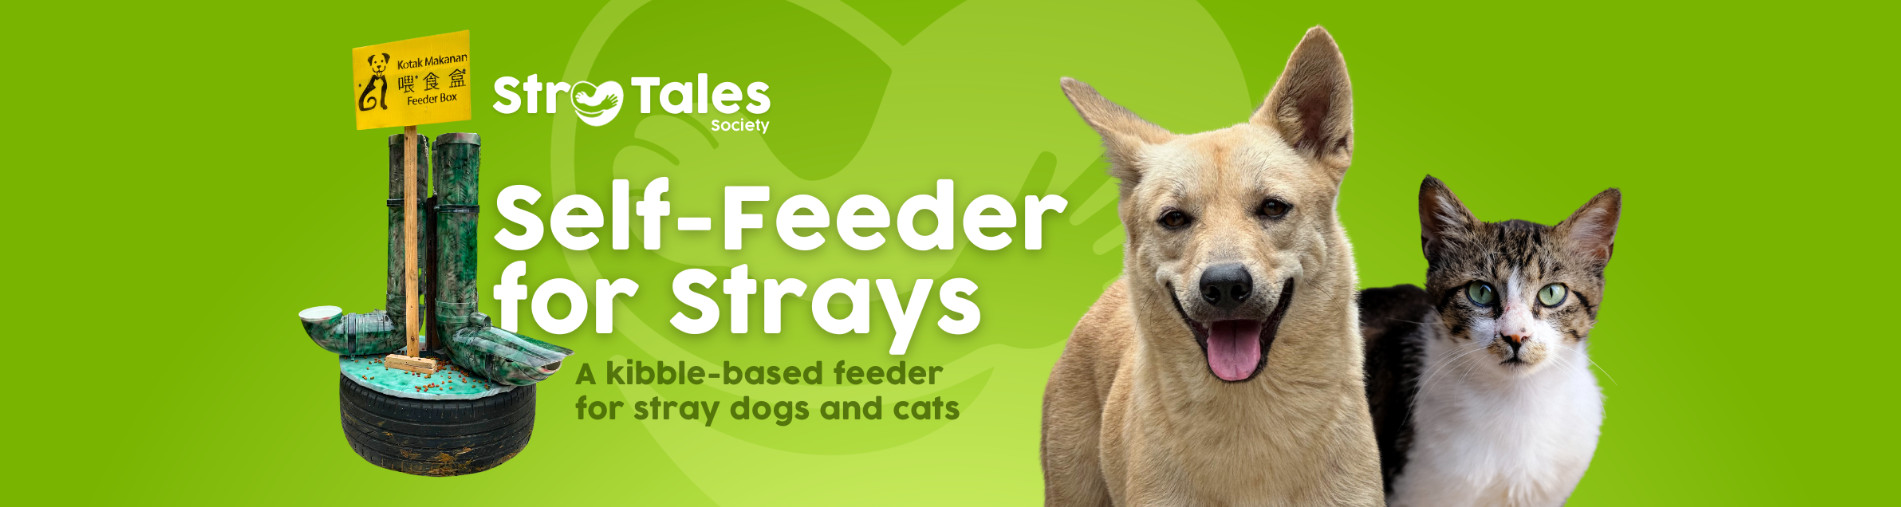 Build Community Self-Feeders for Strays with Stray Tales Society